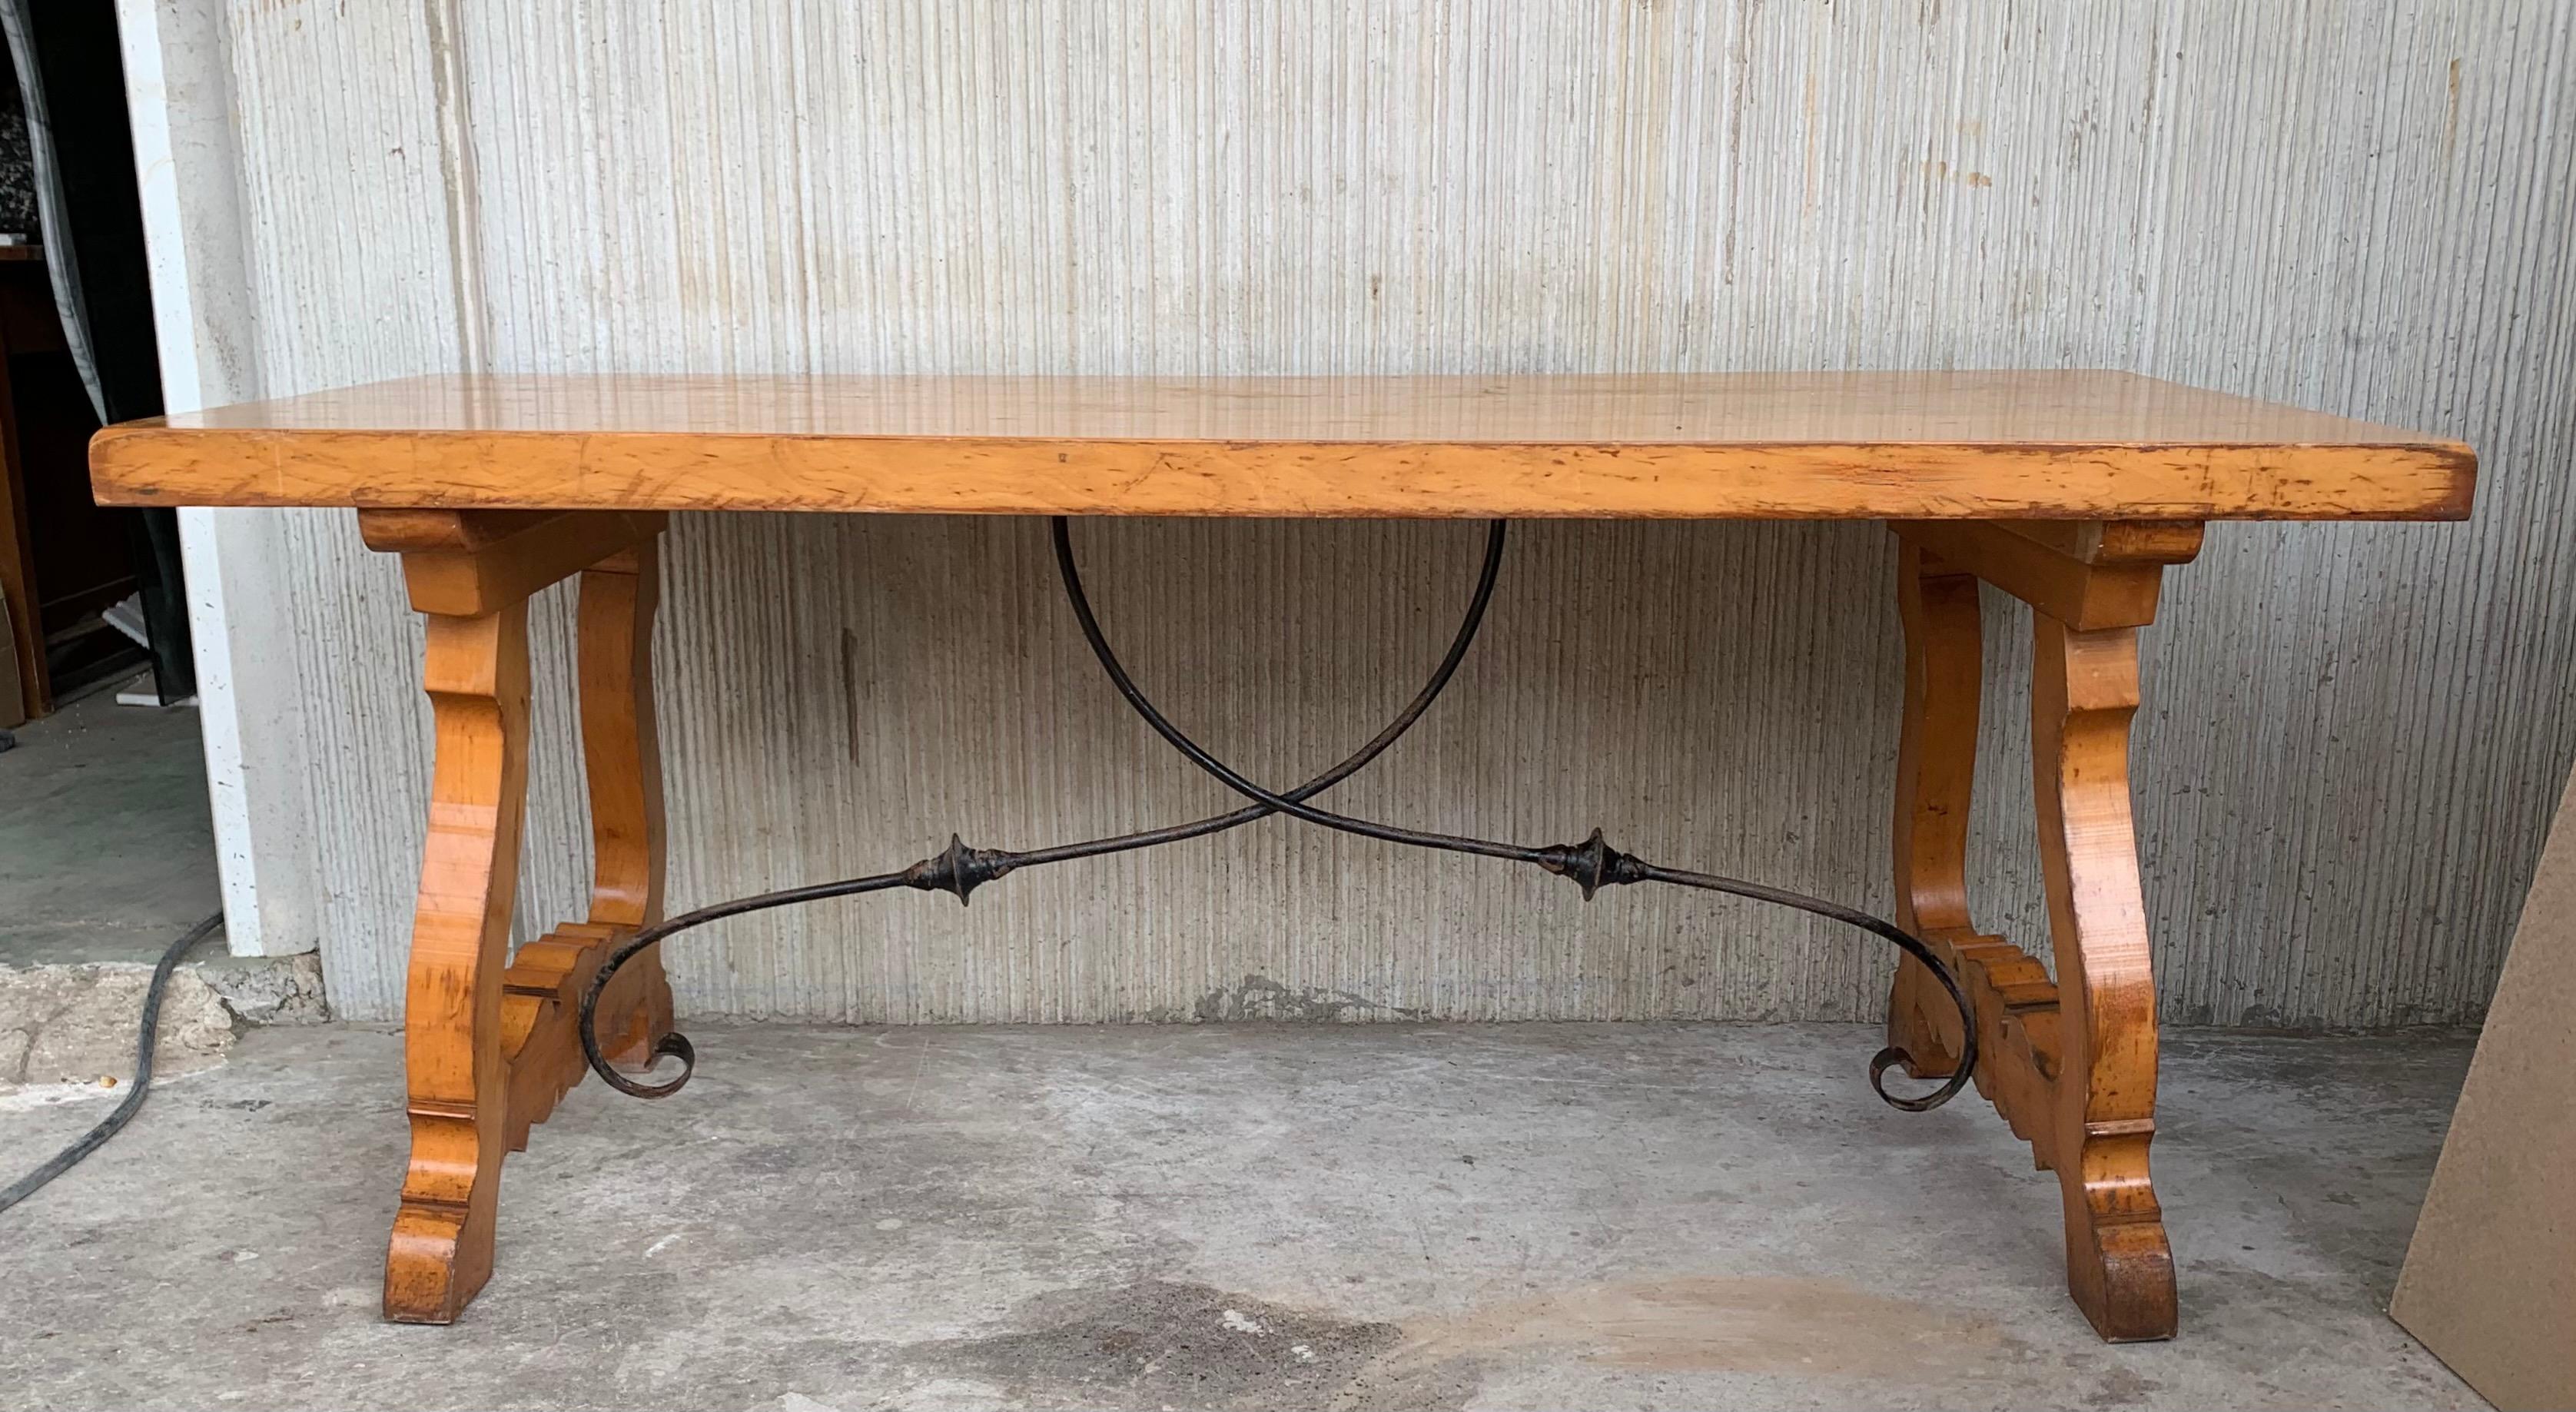 A monumental 20th century Spanish trestle table, having a rectangular framed solid walnut inset board top, resting on hand carved, classical lyre legs joined by four beautifully iron stretchers.

This table was designed for a grand room and seats